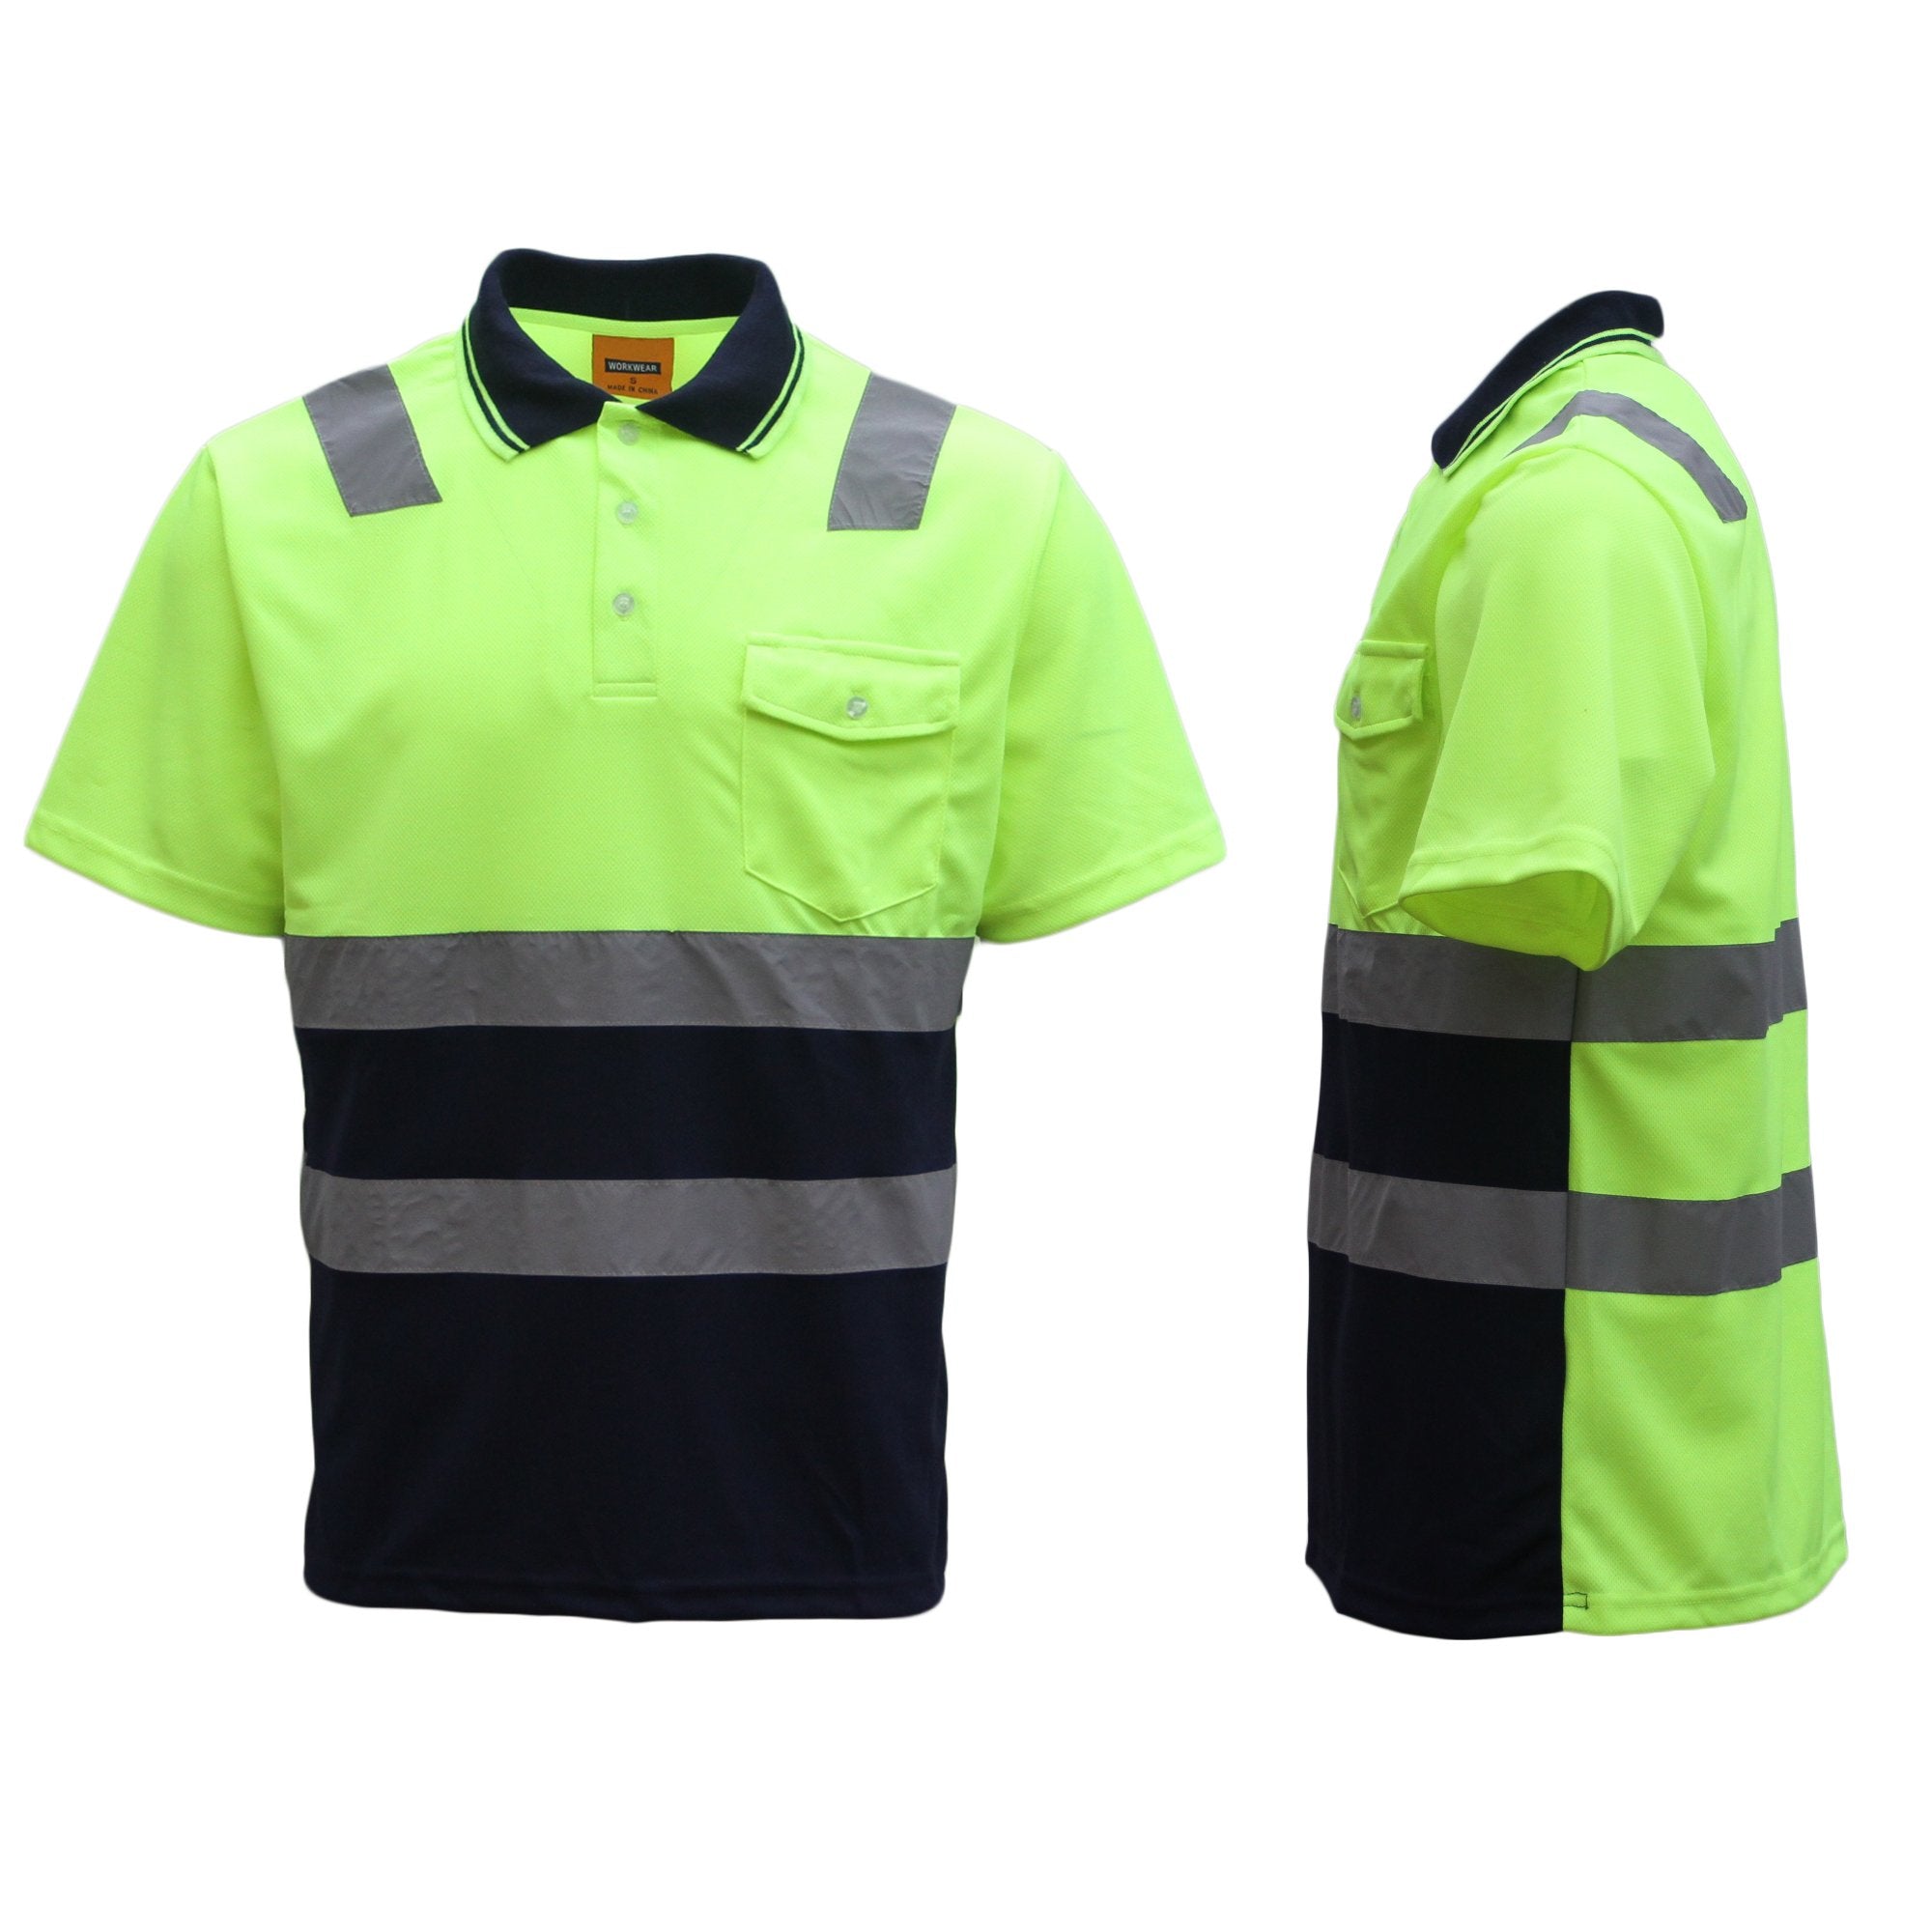 HI VIS Short Sleeve Workwear Shirt w Reflective Tape Cool Dry Safety Polo 2 Tone, Fluoro Yellow / Navy, 2XL